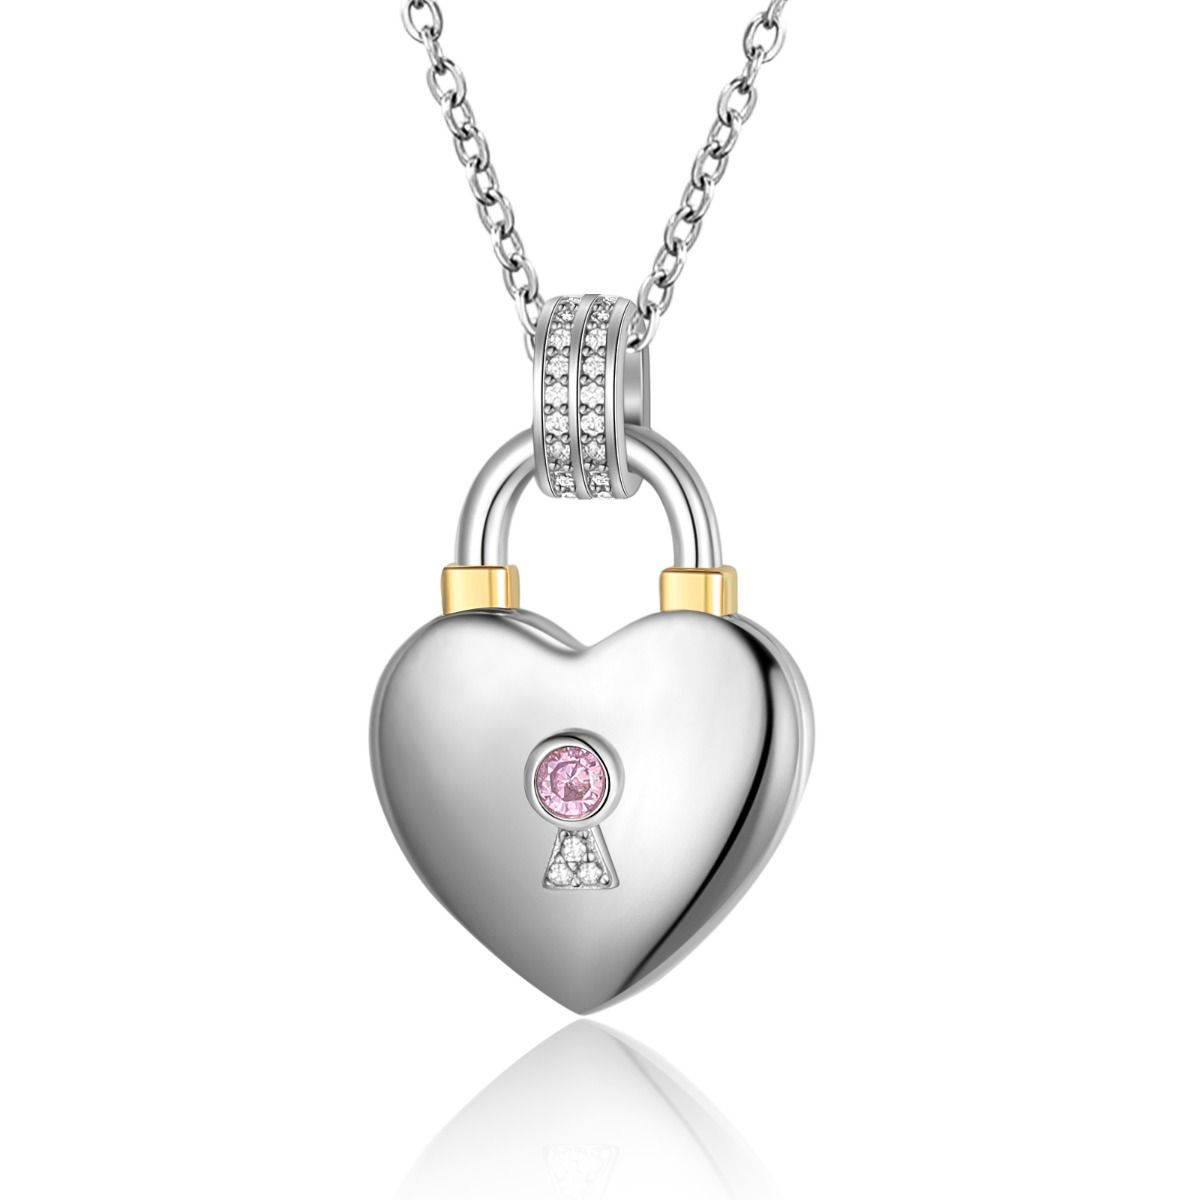 Personalised Heart Lock Photo Necklace | Custom Engraved Necklace With Photo